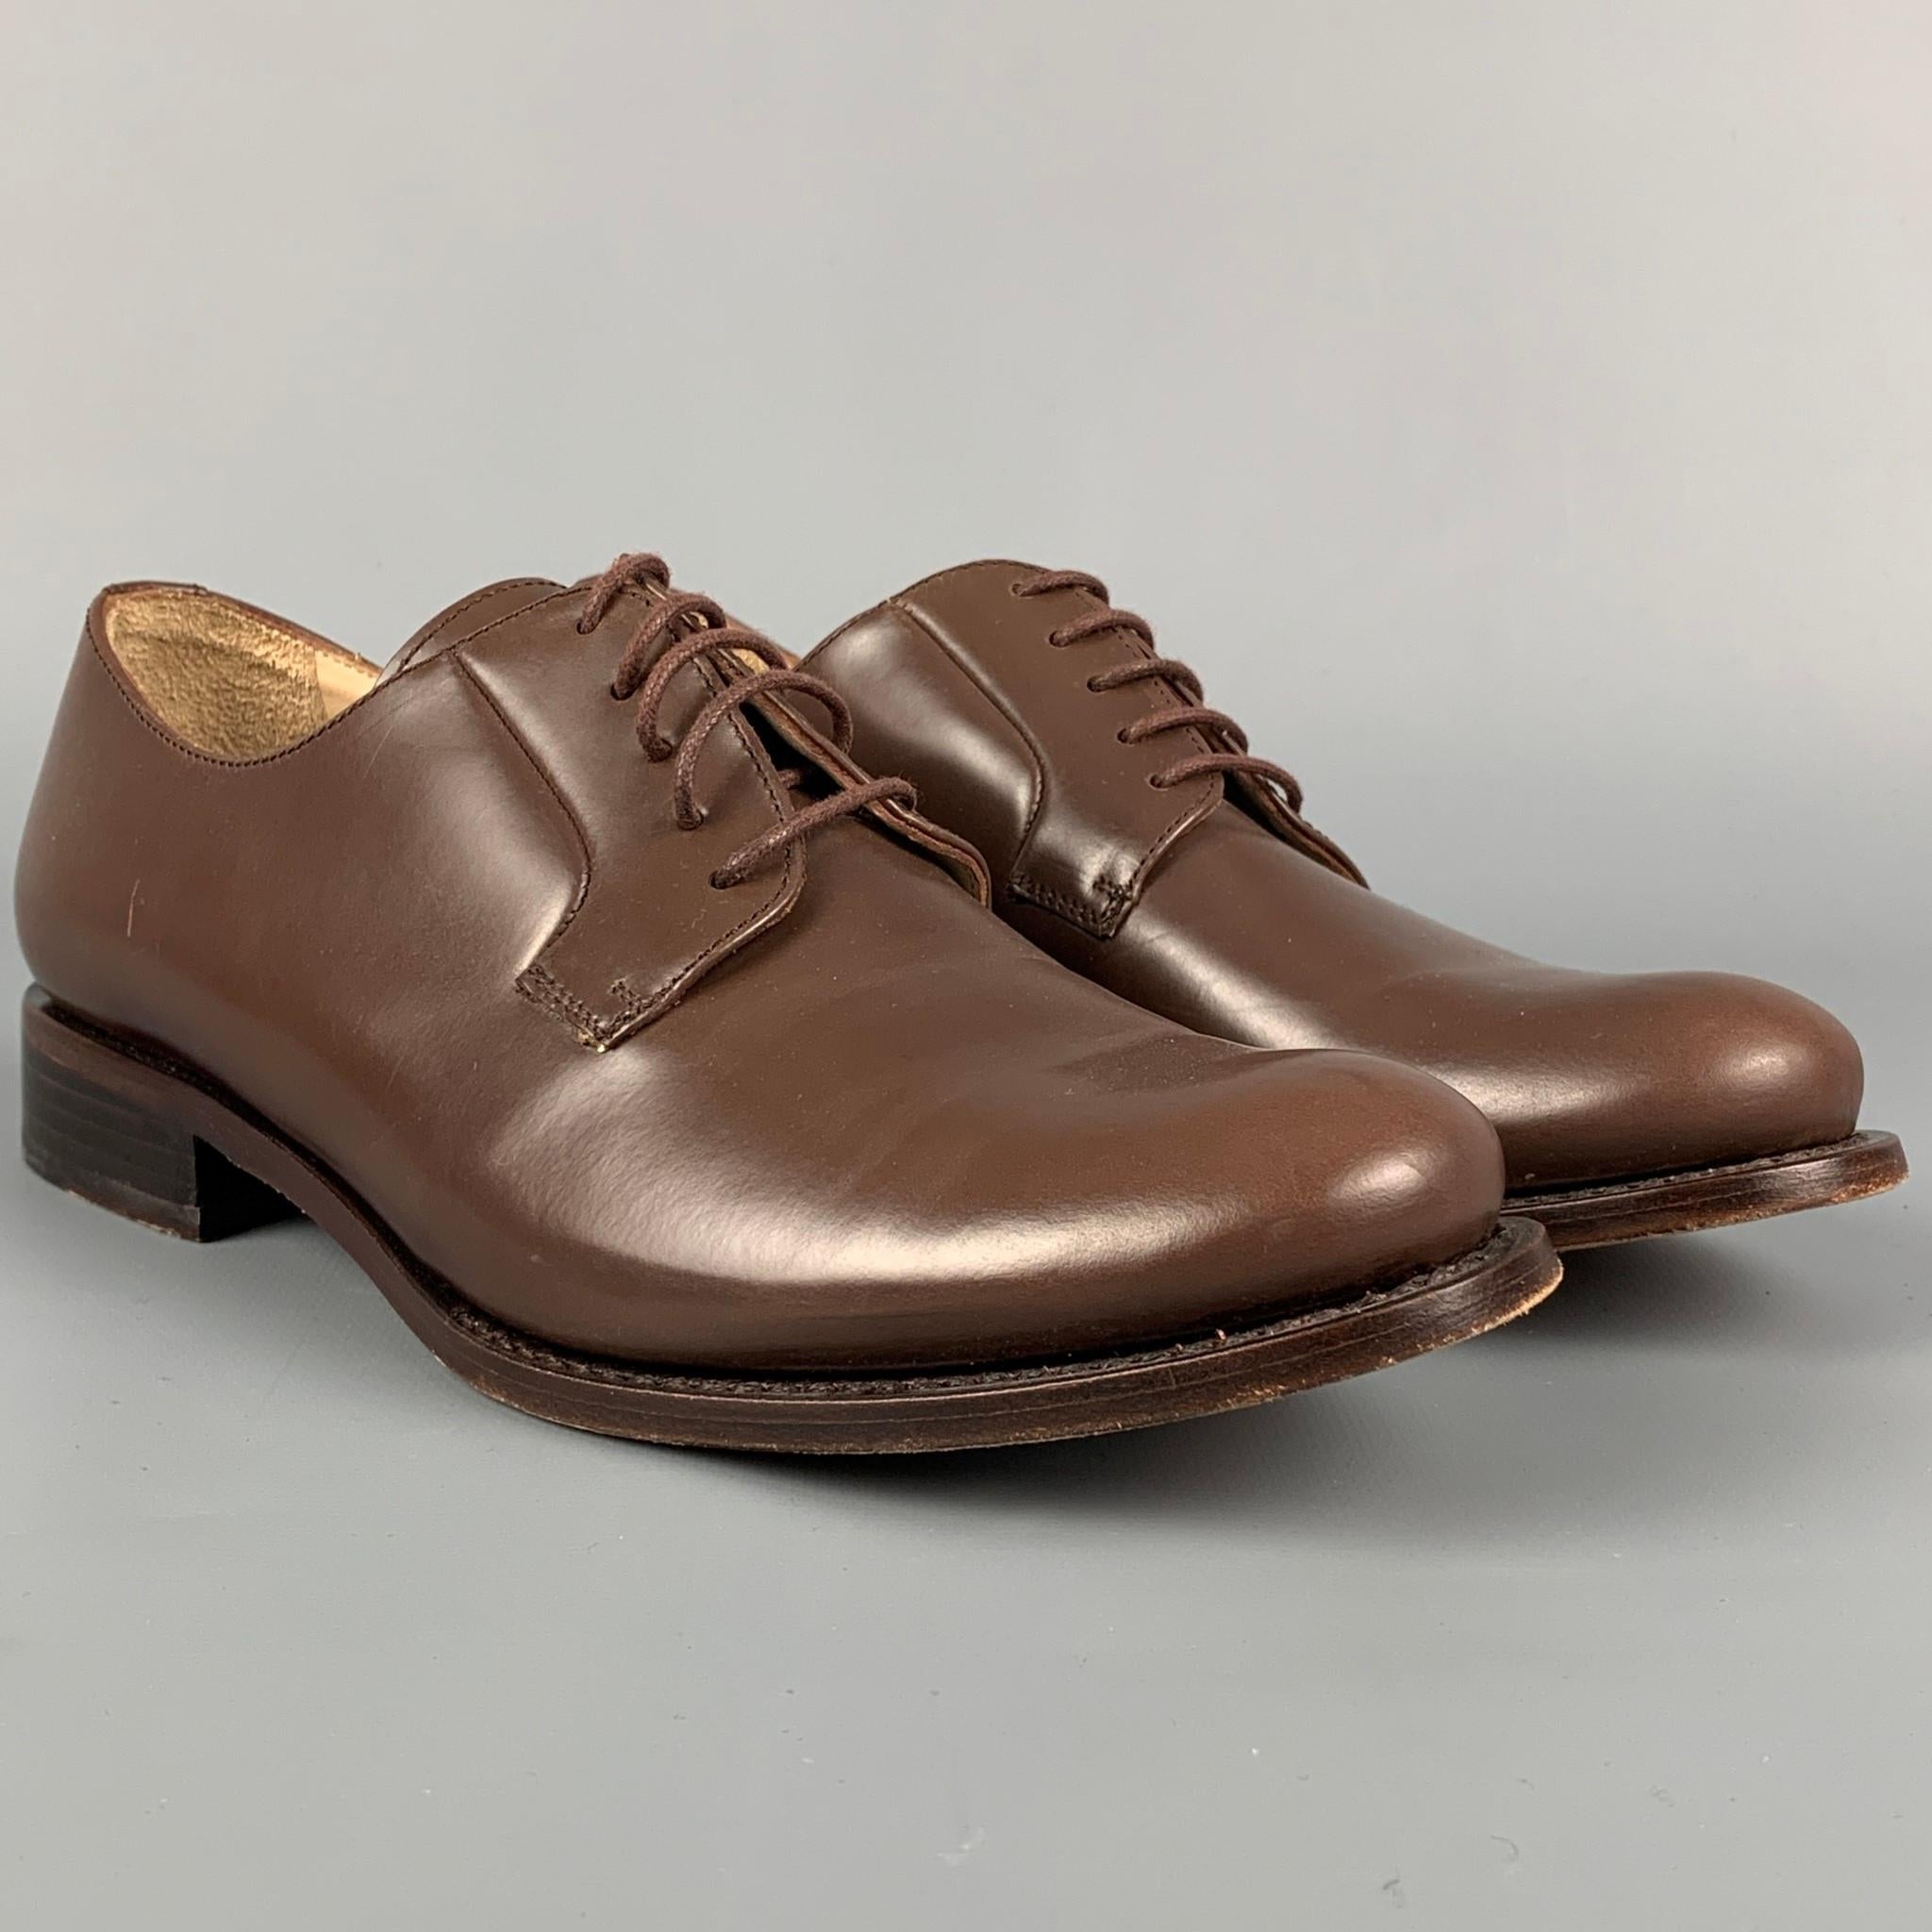 JIL SANDER shoes comes in a brown leather featuring a chunky heel and a lace up closure. Made in Italy. 

Very Good Pre-Owned Condition.
Marked: 36.5

Outsole: 10 in. x 3.5 in. 